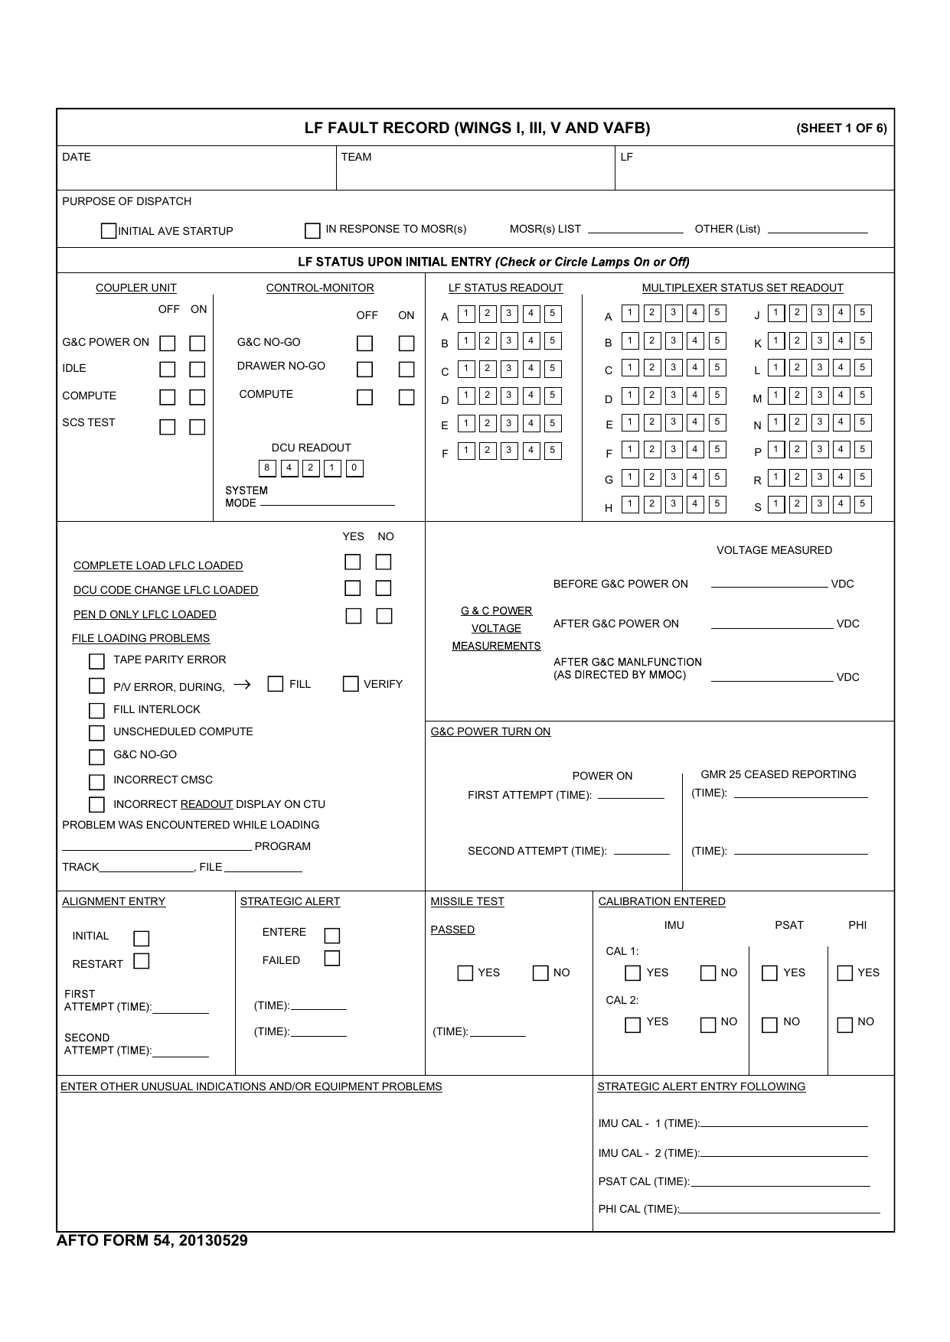 AFTO Form 54 Lf Fault Record (Wings I, Iii, V and Vafb), Page 1